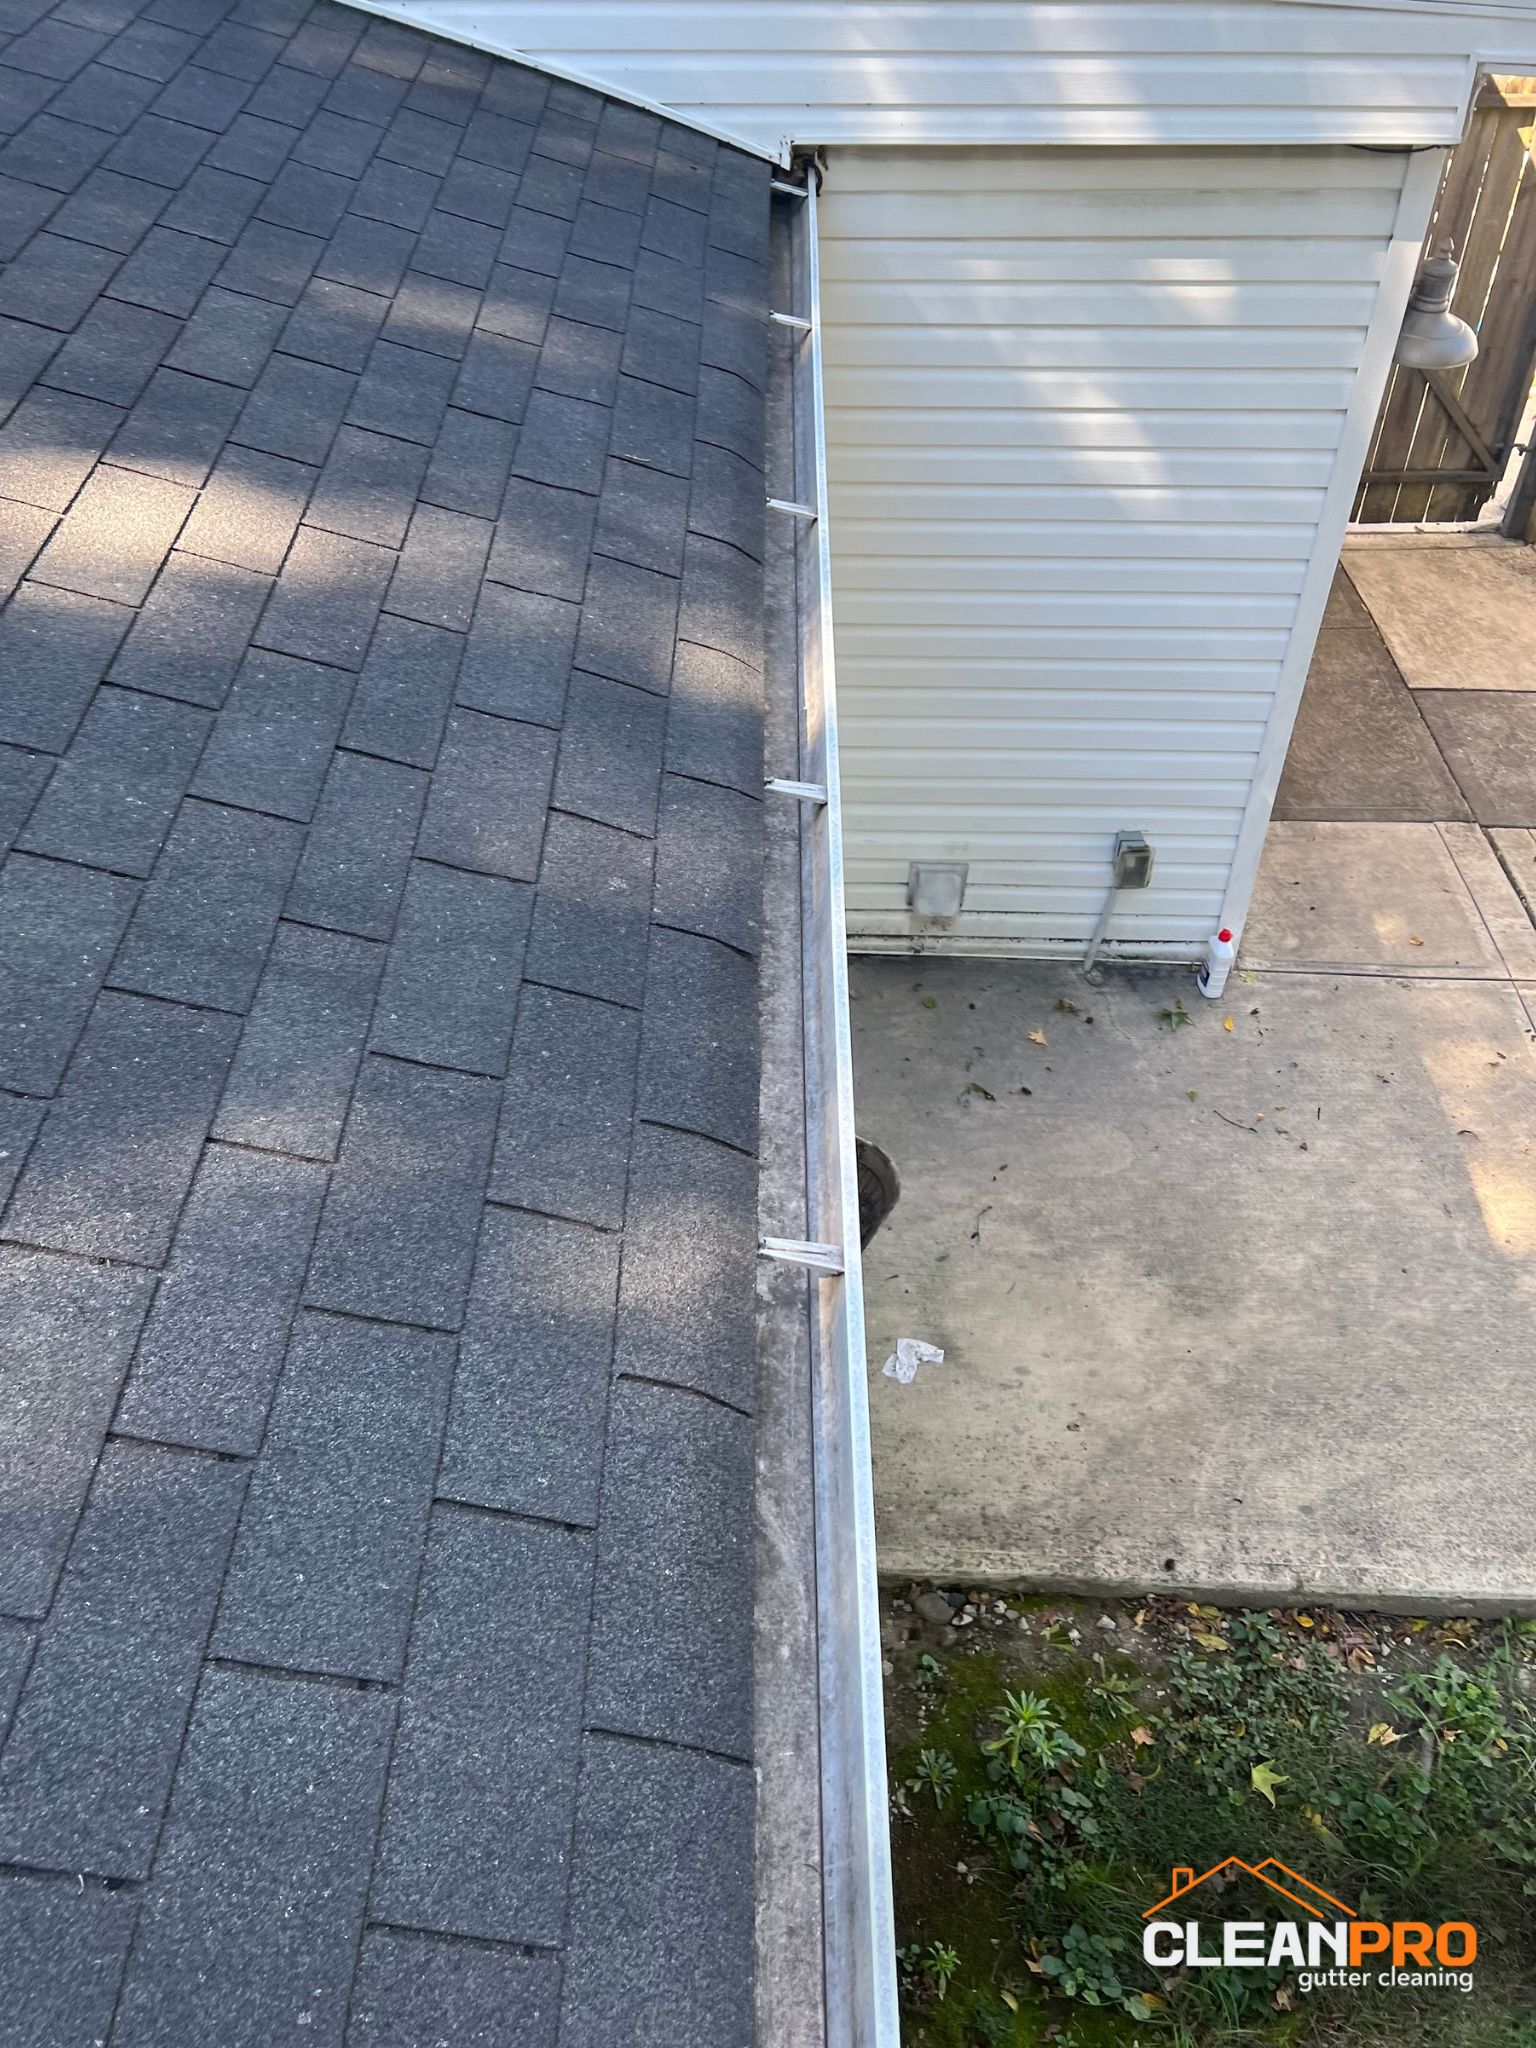 Local Gutter Cleaning in Pittsburgh 